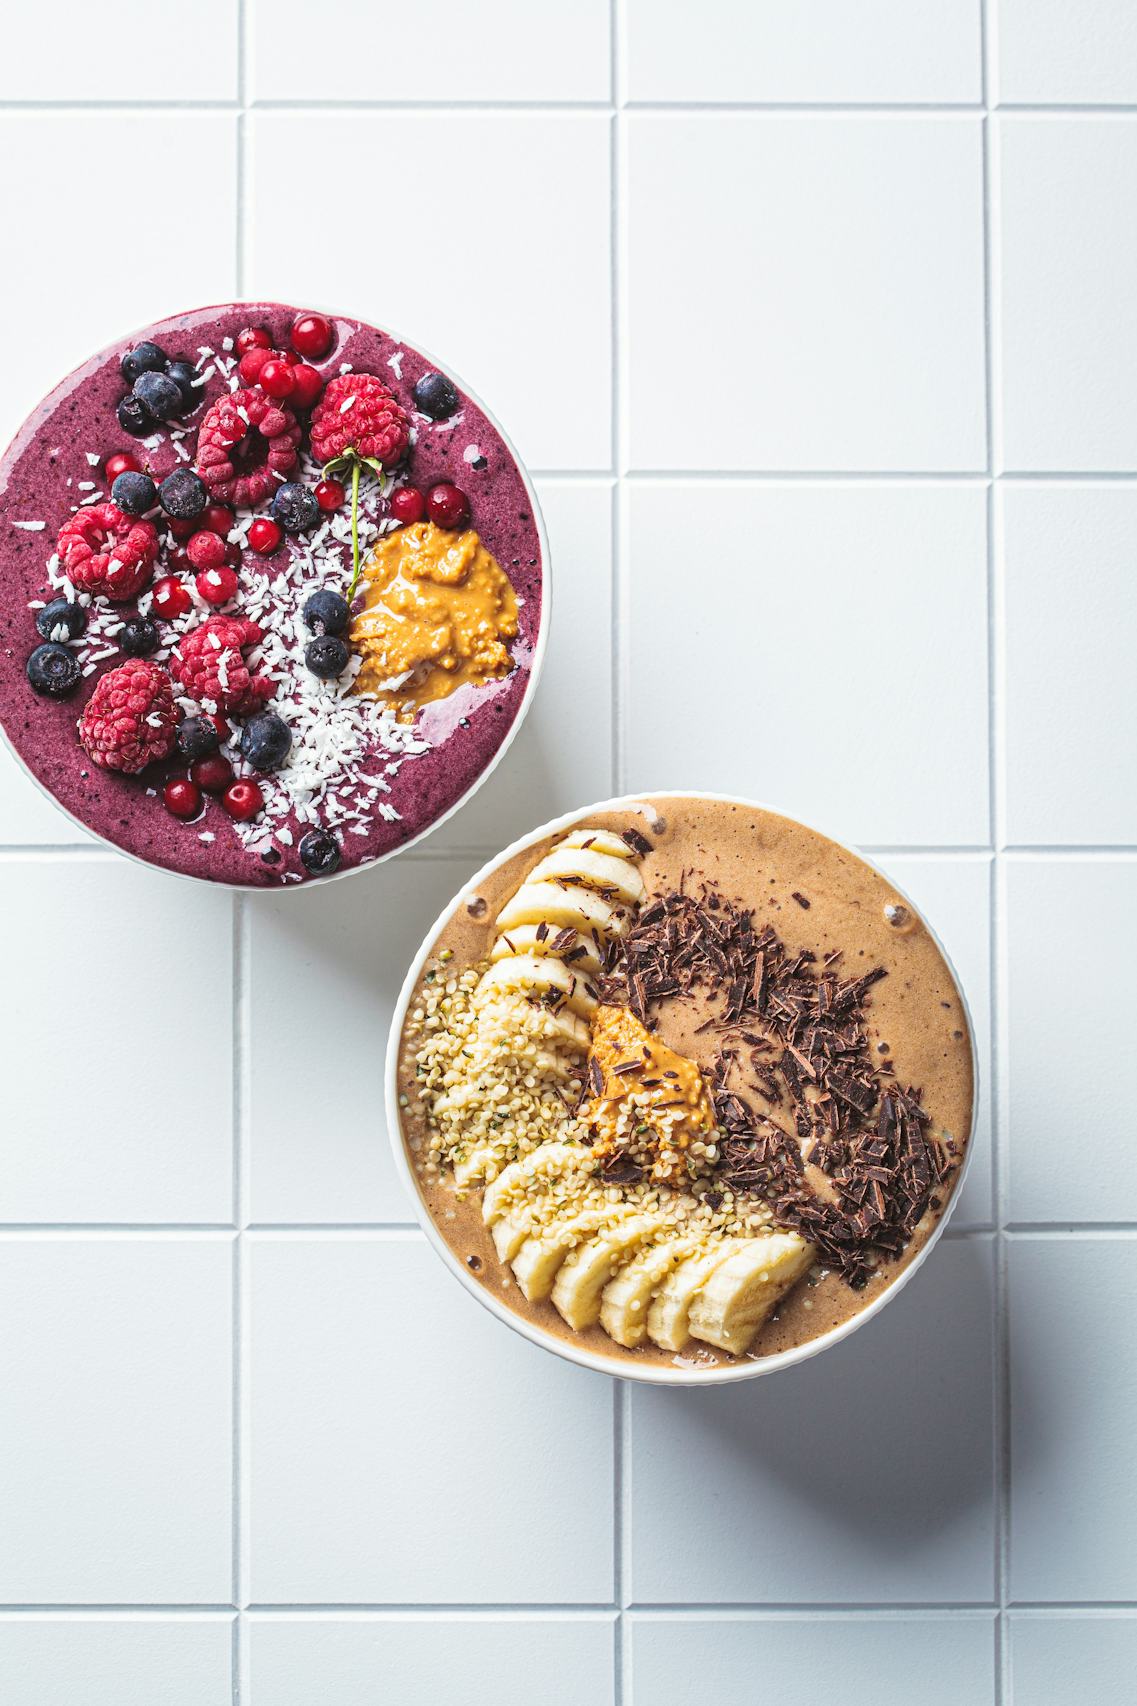 Smoothie Bowls For Breakfast Just Got Even Easier